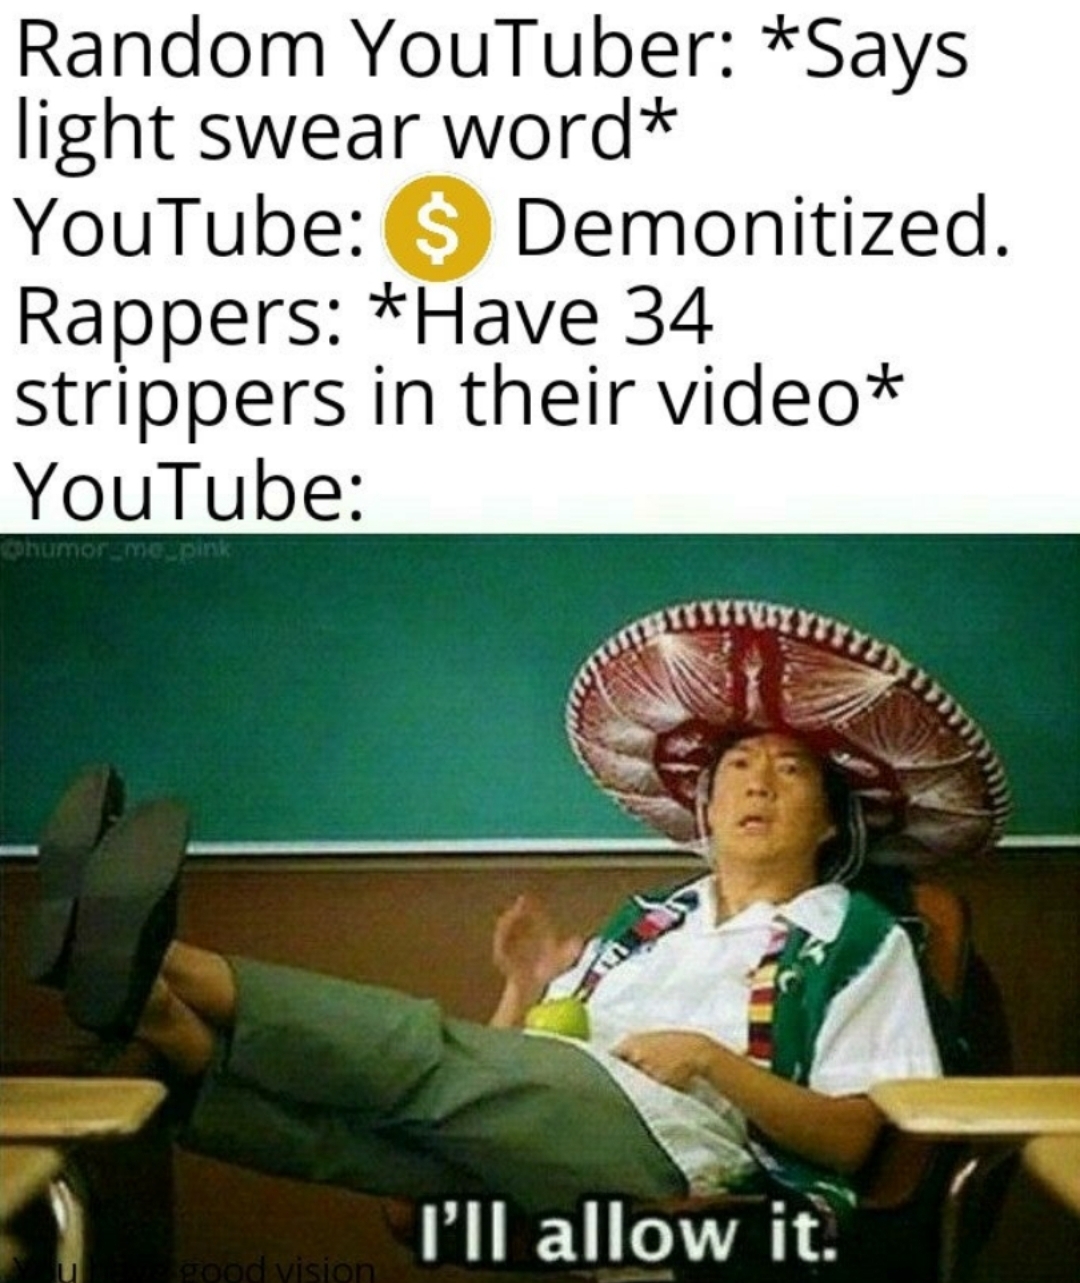 ill allow - Random YouTuber Says light swear word YouTube $ Demonitized. Rappers Have 34 strippers in their video YouTube I'll allow it.